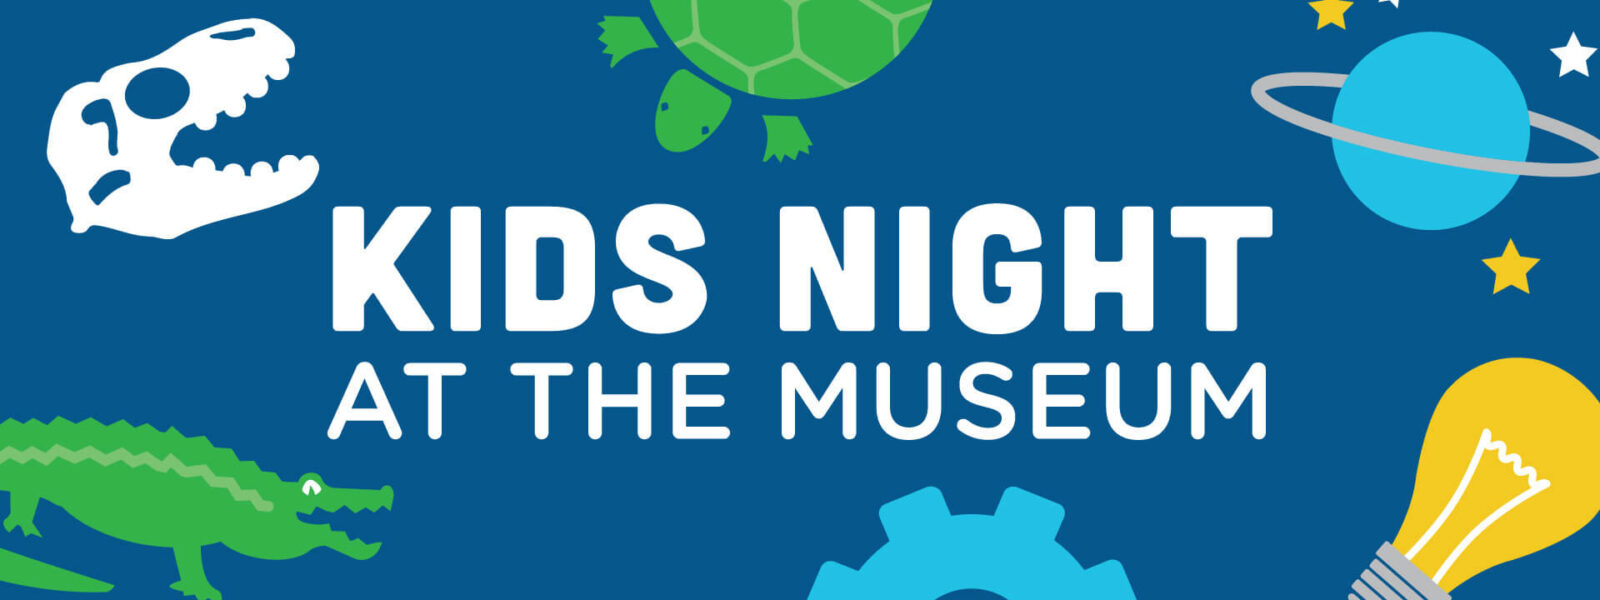 Orlando Science Museum Kids Night at the Museum August 2020